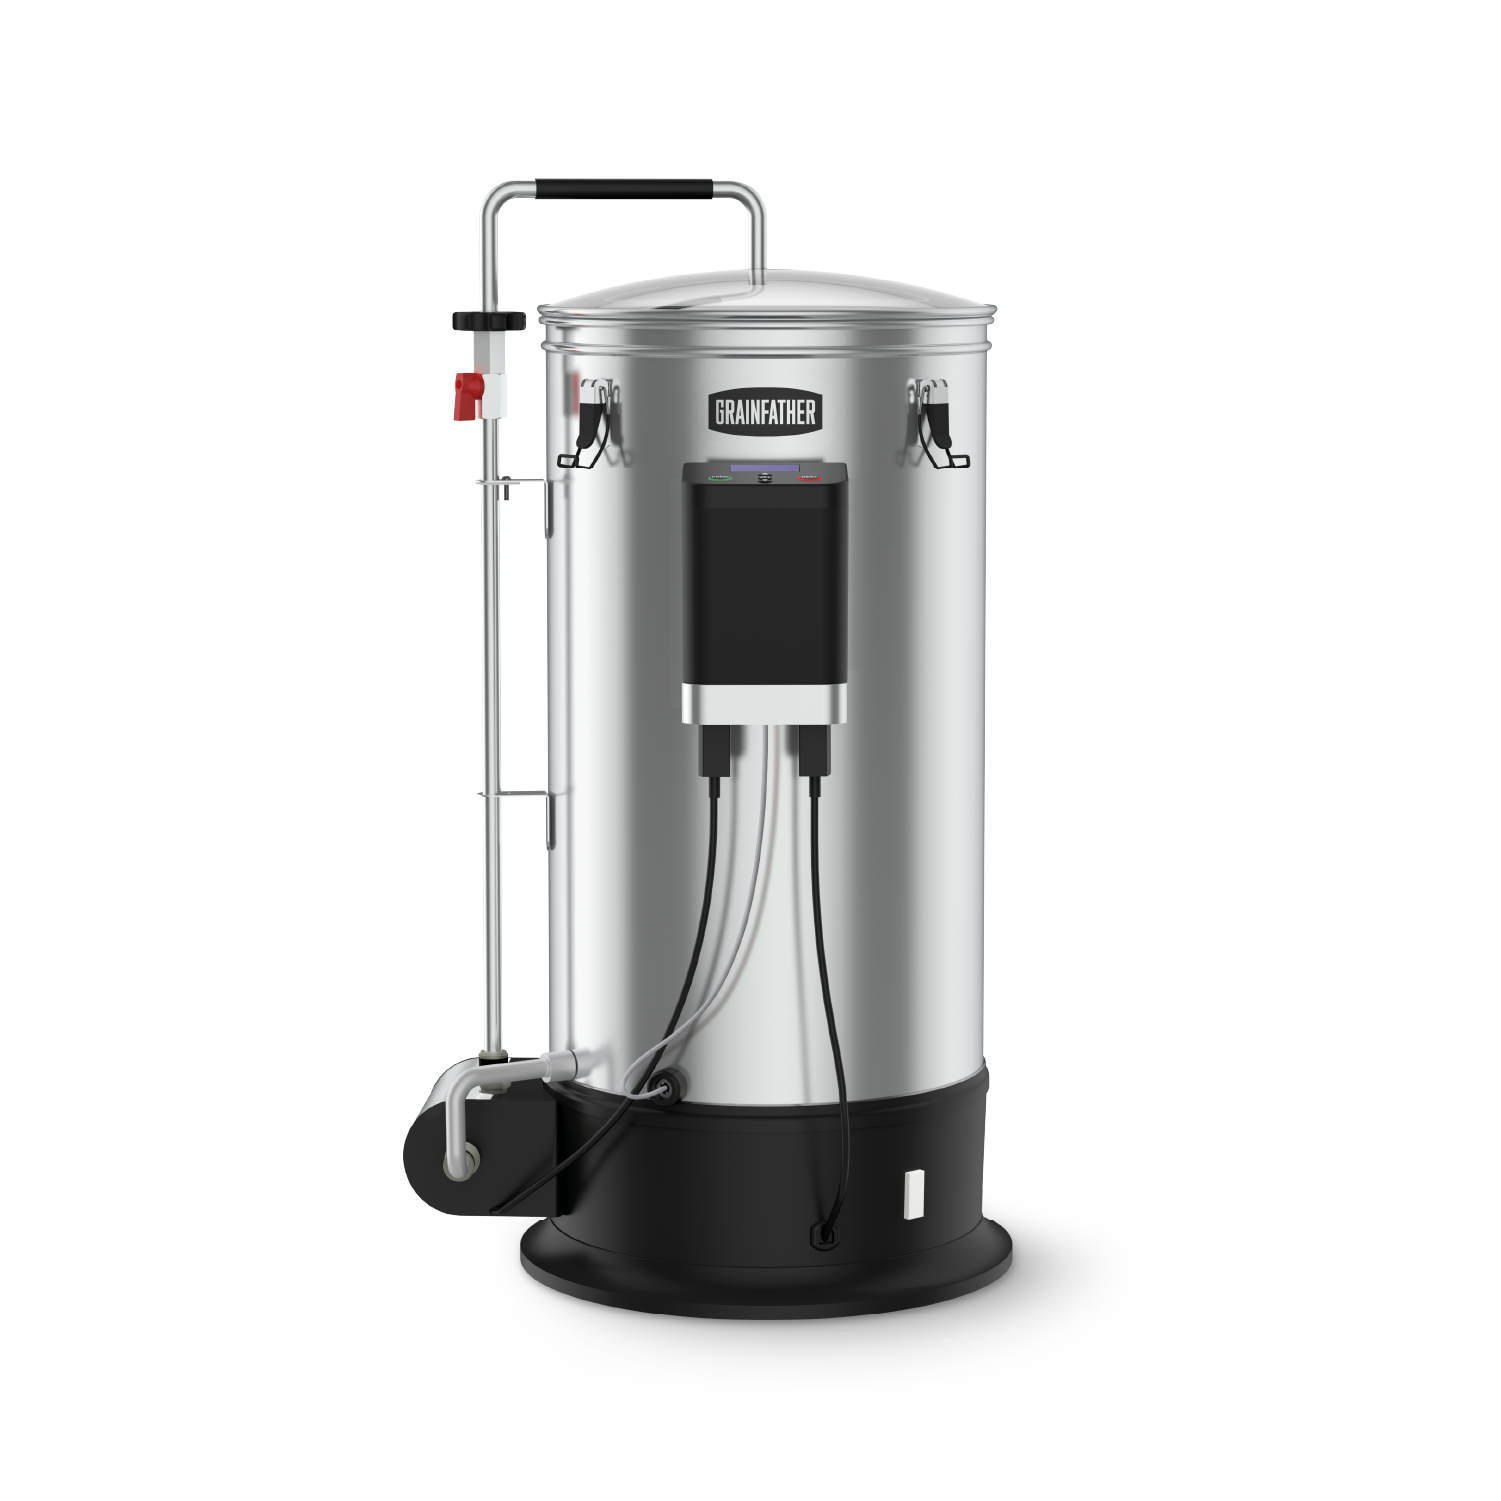 Grainfather G30v3 Automatic Brewkettle